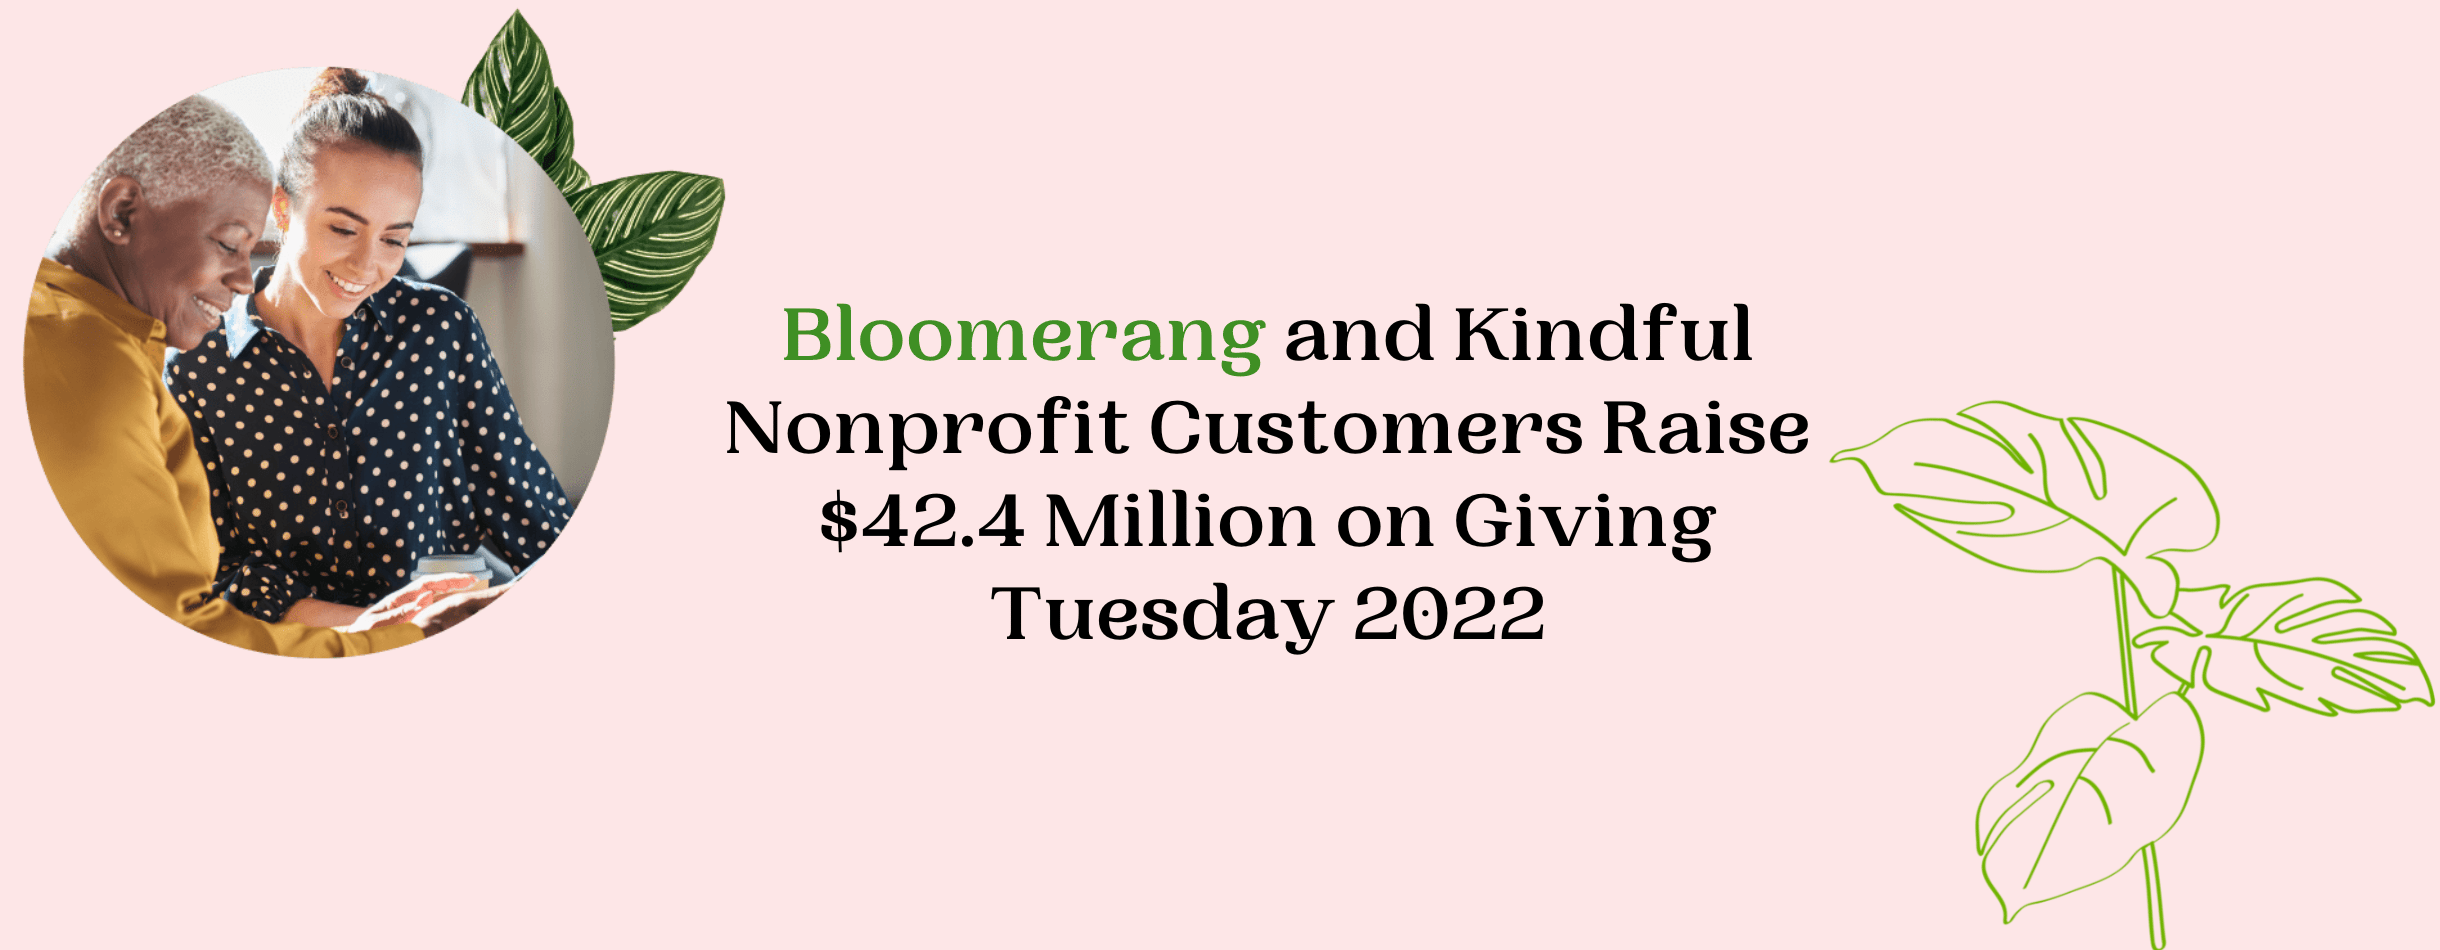 Bloomerang and Kindful nonprofit customers raise $42.4 million on Giving Tuesday